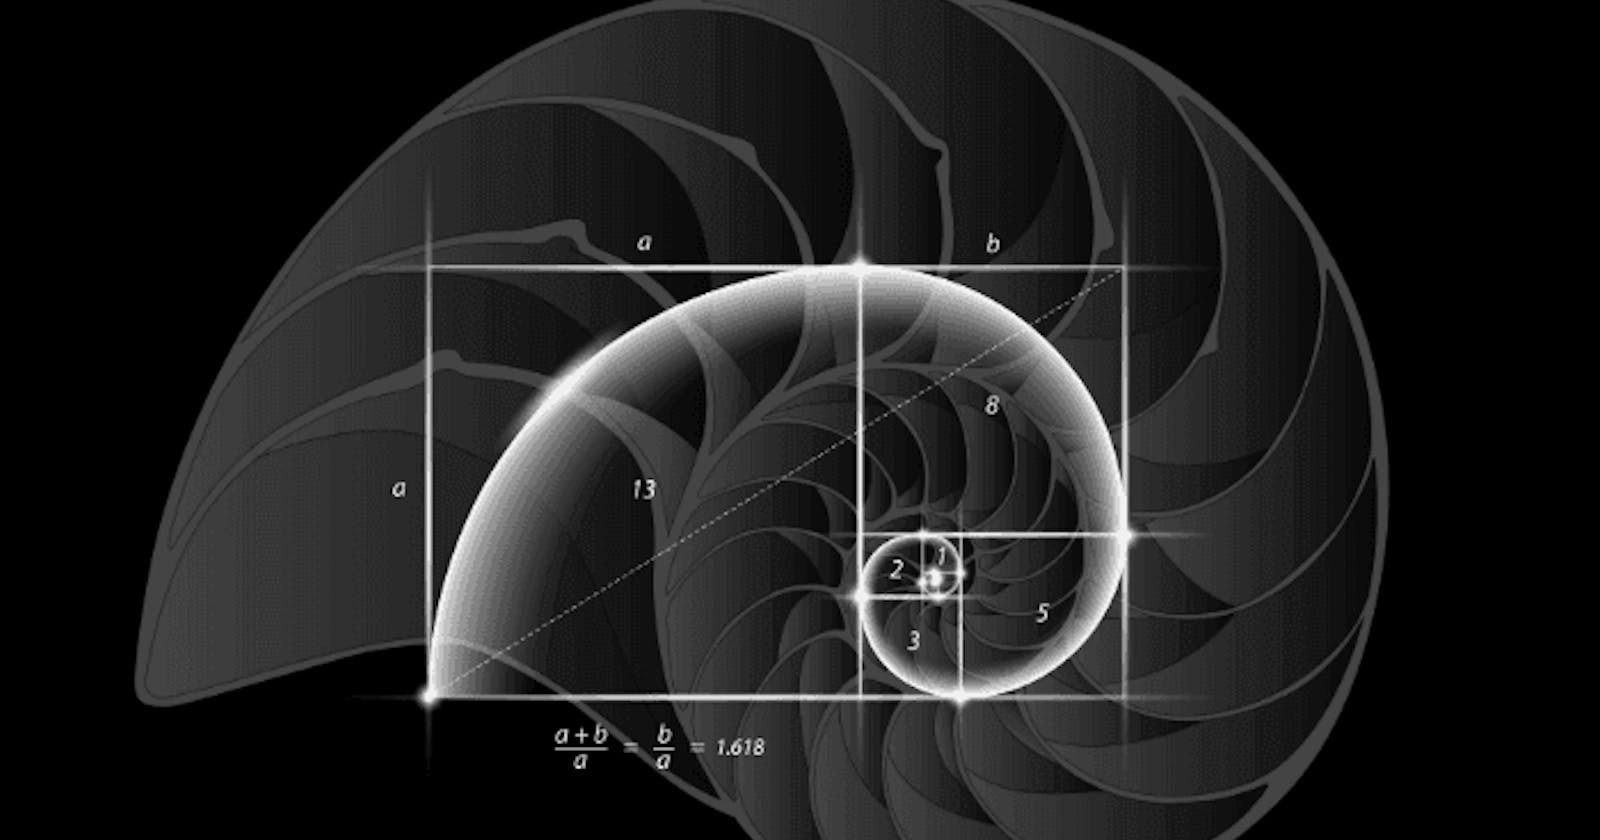 Solving the Nth value of the Fibonacci sequence